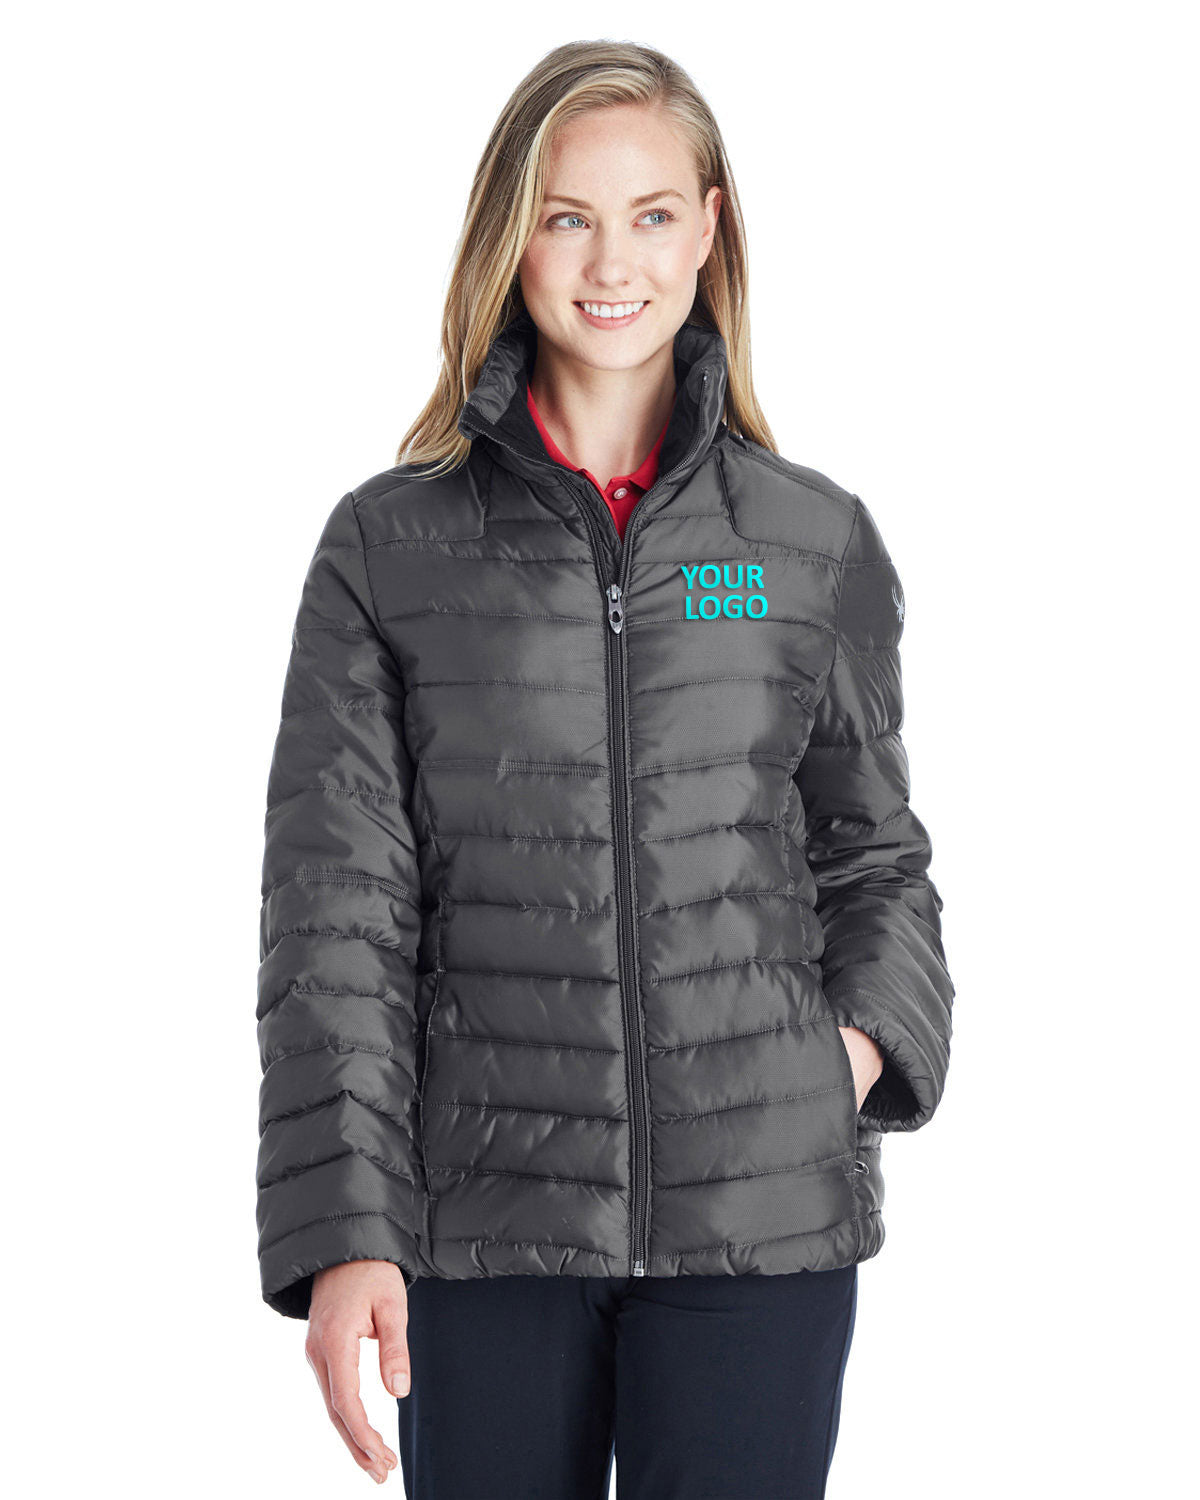 Spyder POLAR/ ALLOY 187336 embroidered jackets for business